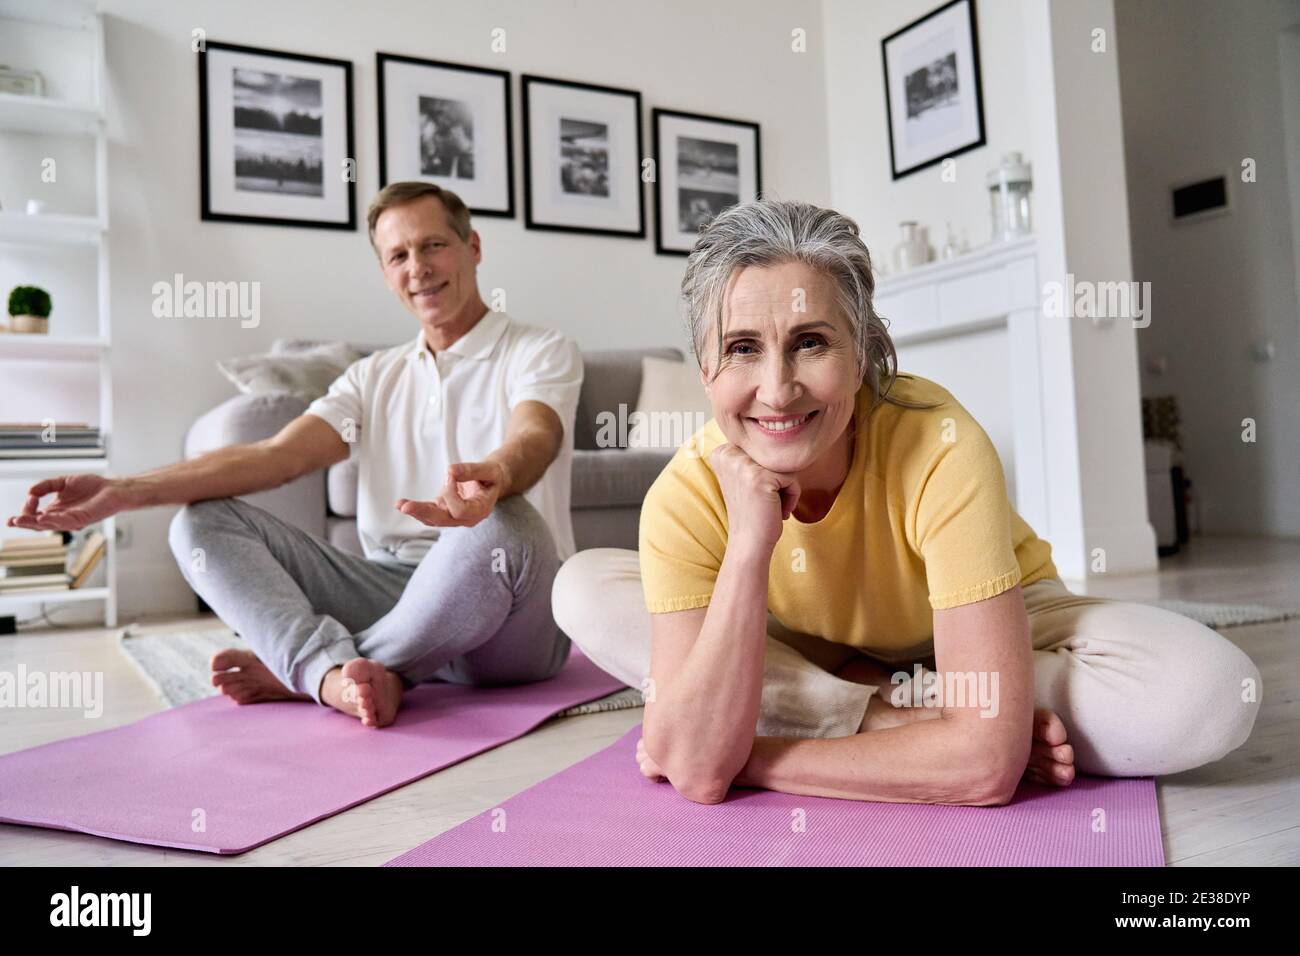 Happy fit middle aged woman exercising with husband at home, portrait. Stock Photo